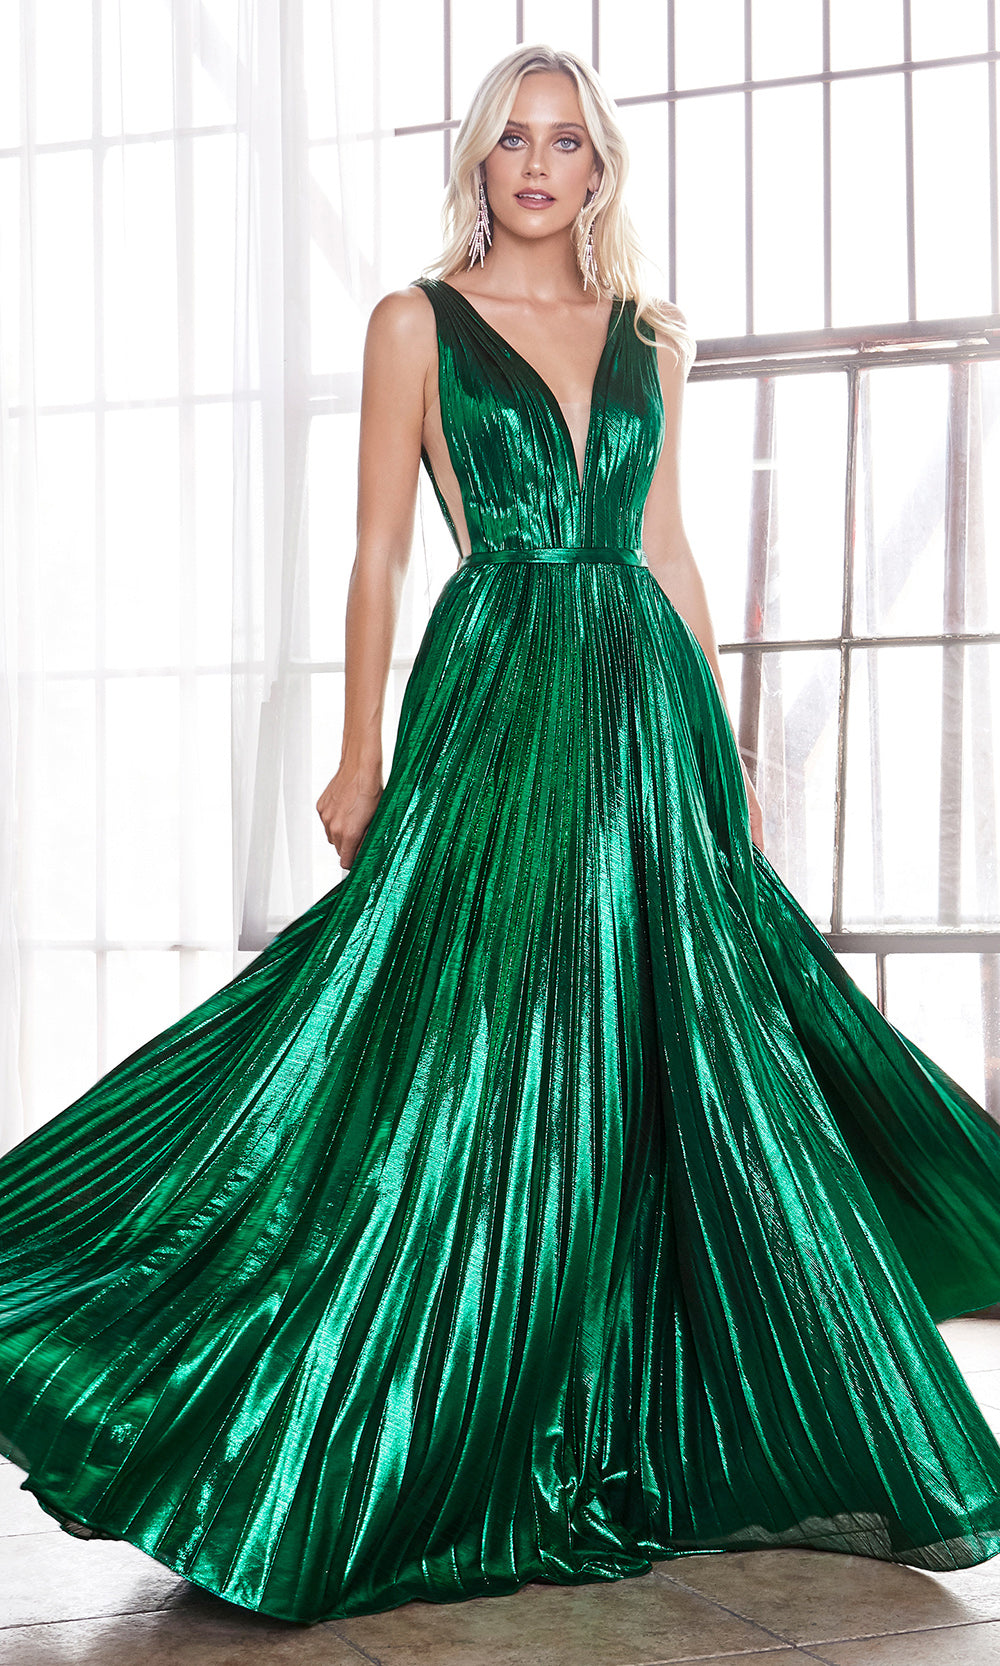 Cinderella Divine CD160 emerald green v neck simple dress w/empire waist & wide straps. Perfect dark green dress for prom, bridesmaid dress, formal party dress. Plus sizes avail.jpg